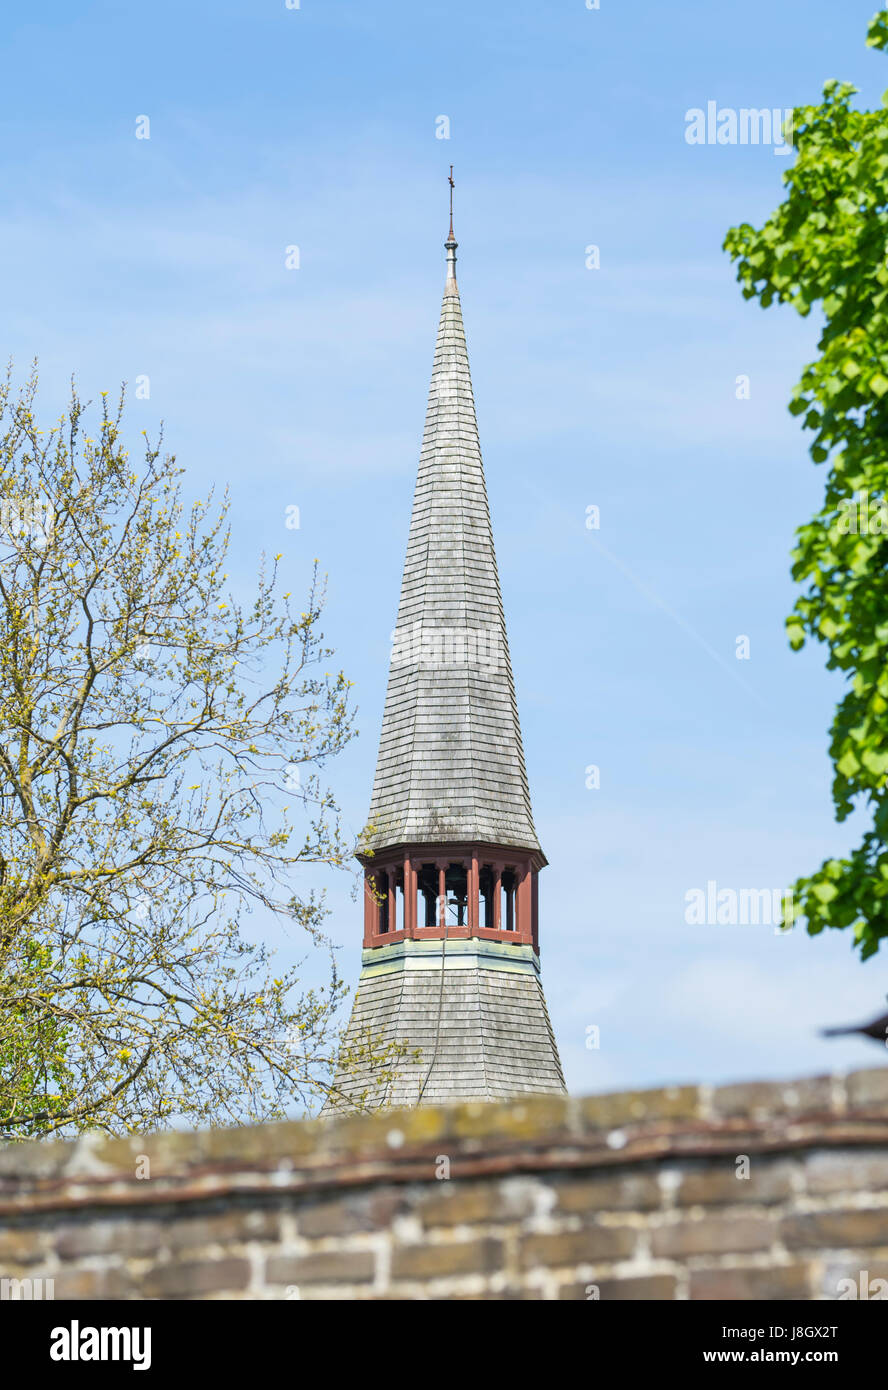 Steeple and bell tower of the church of the Convent of Poor Clares in Crossbush, Arundel, West Sussex, England, UK. Stock Photo